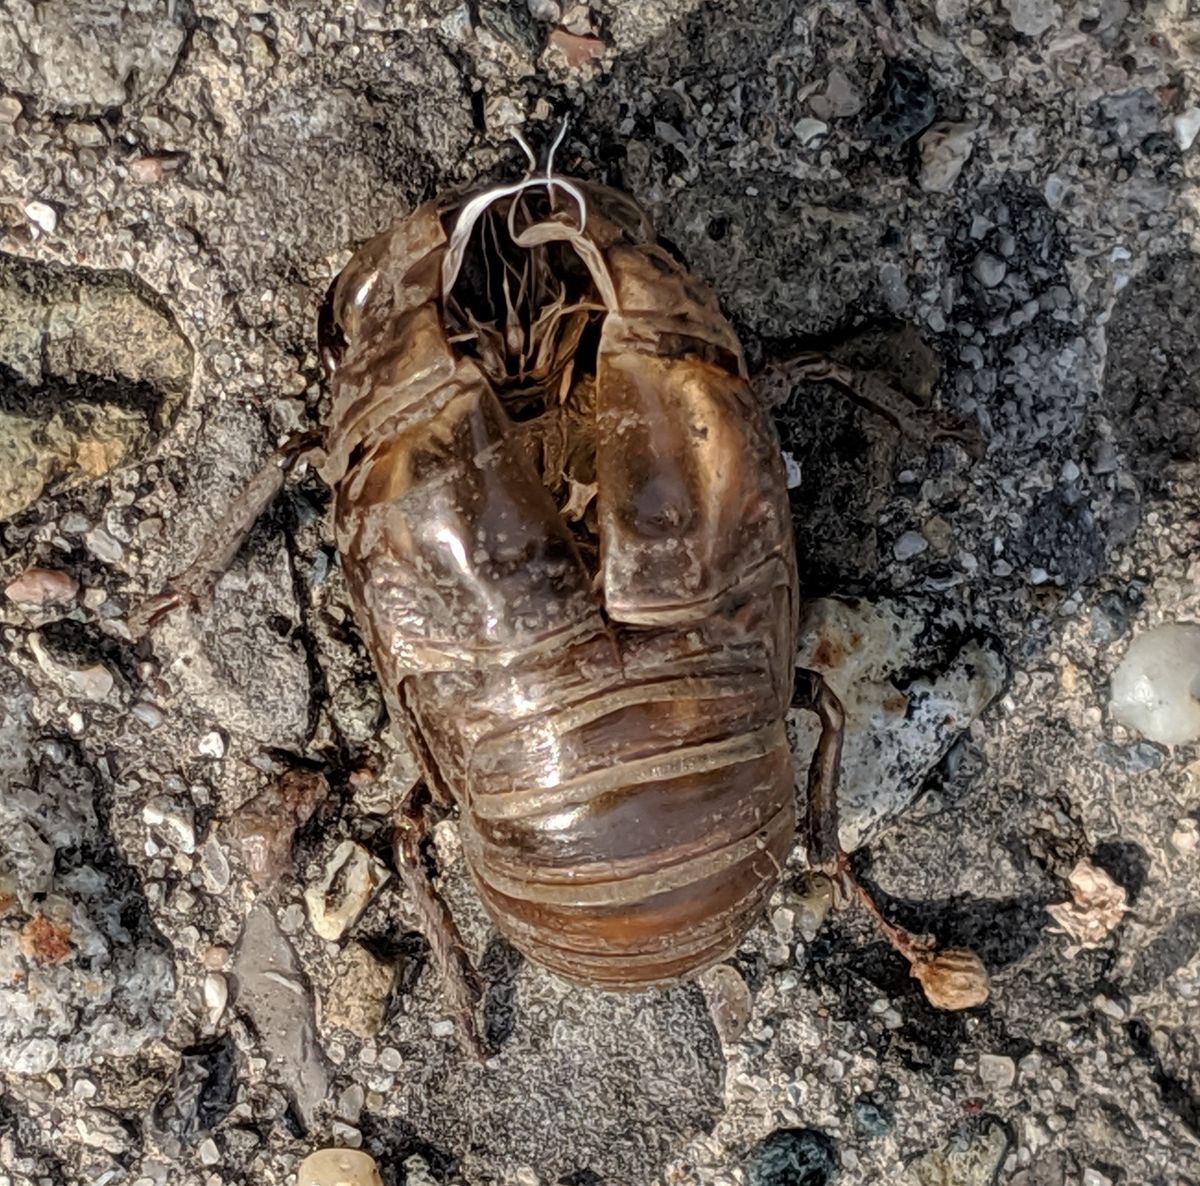 A husk of an annual (dog-day) cicada, from mid-August in 2019; annual cicadas are more summer insects. Credit: Dale Bowman